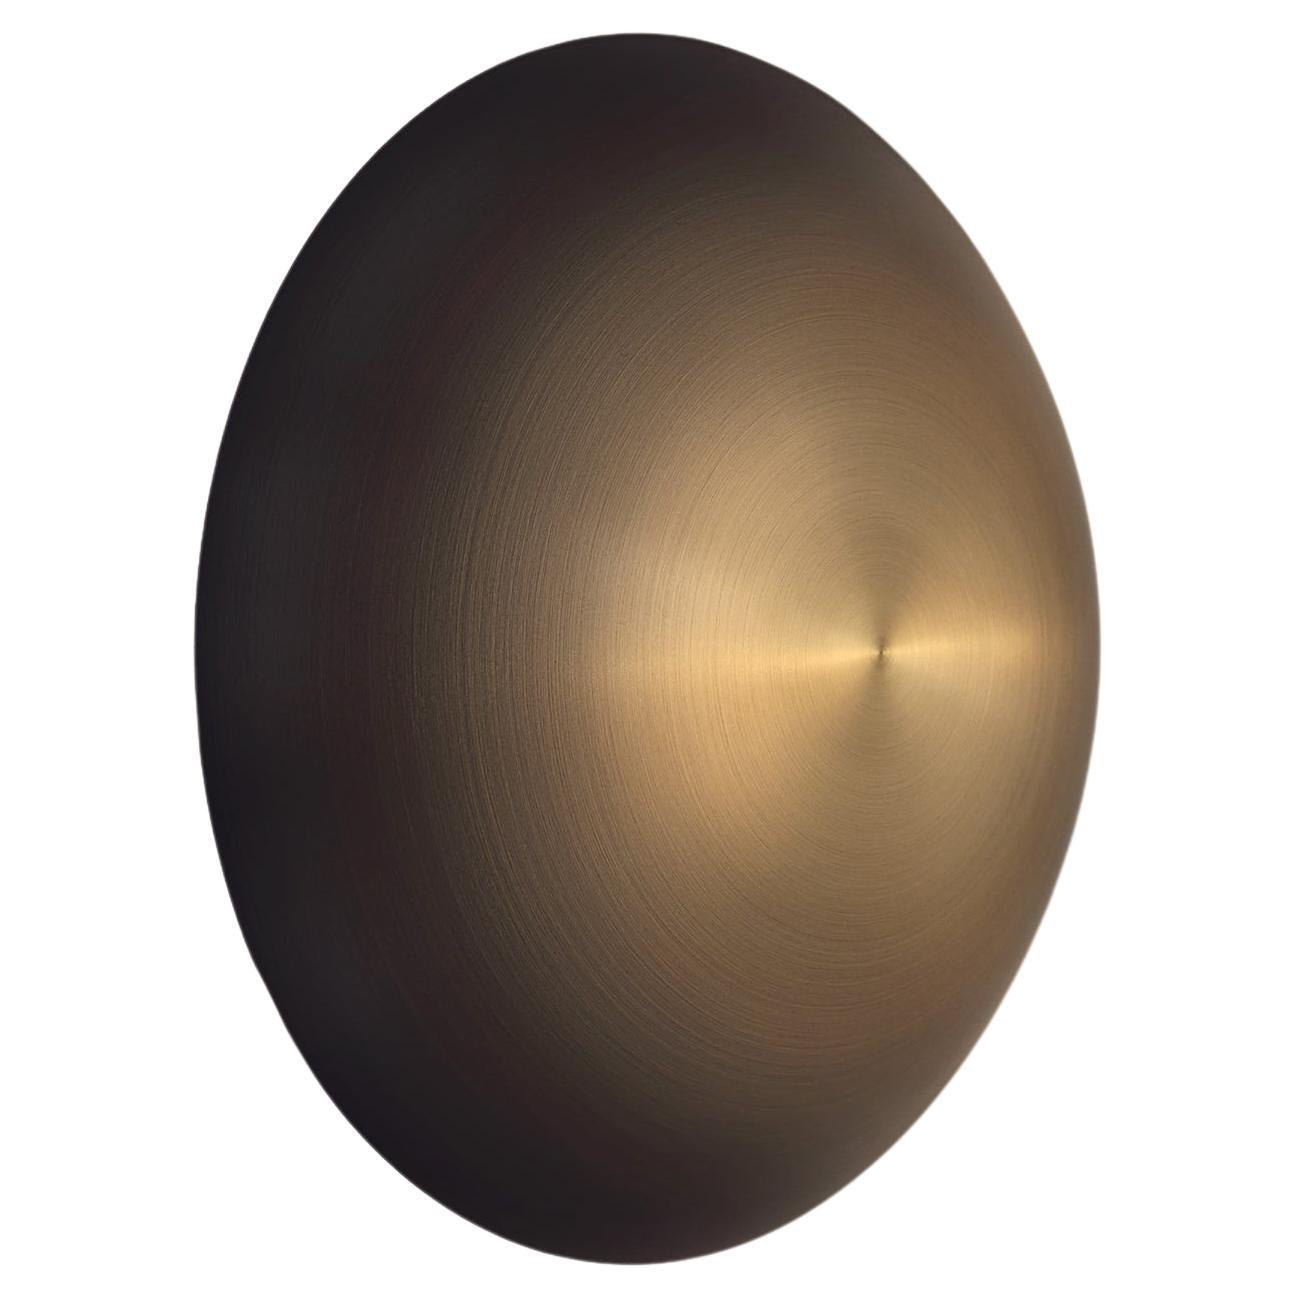 Cosmic 'Comet Ore 26' Bronze Gradient Patinated Brass Wall Light, Sconce For Sale